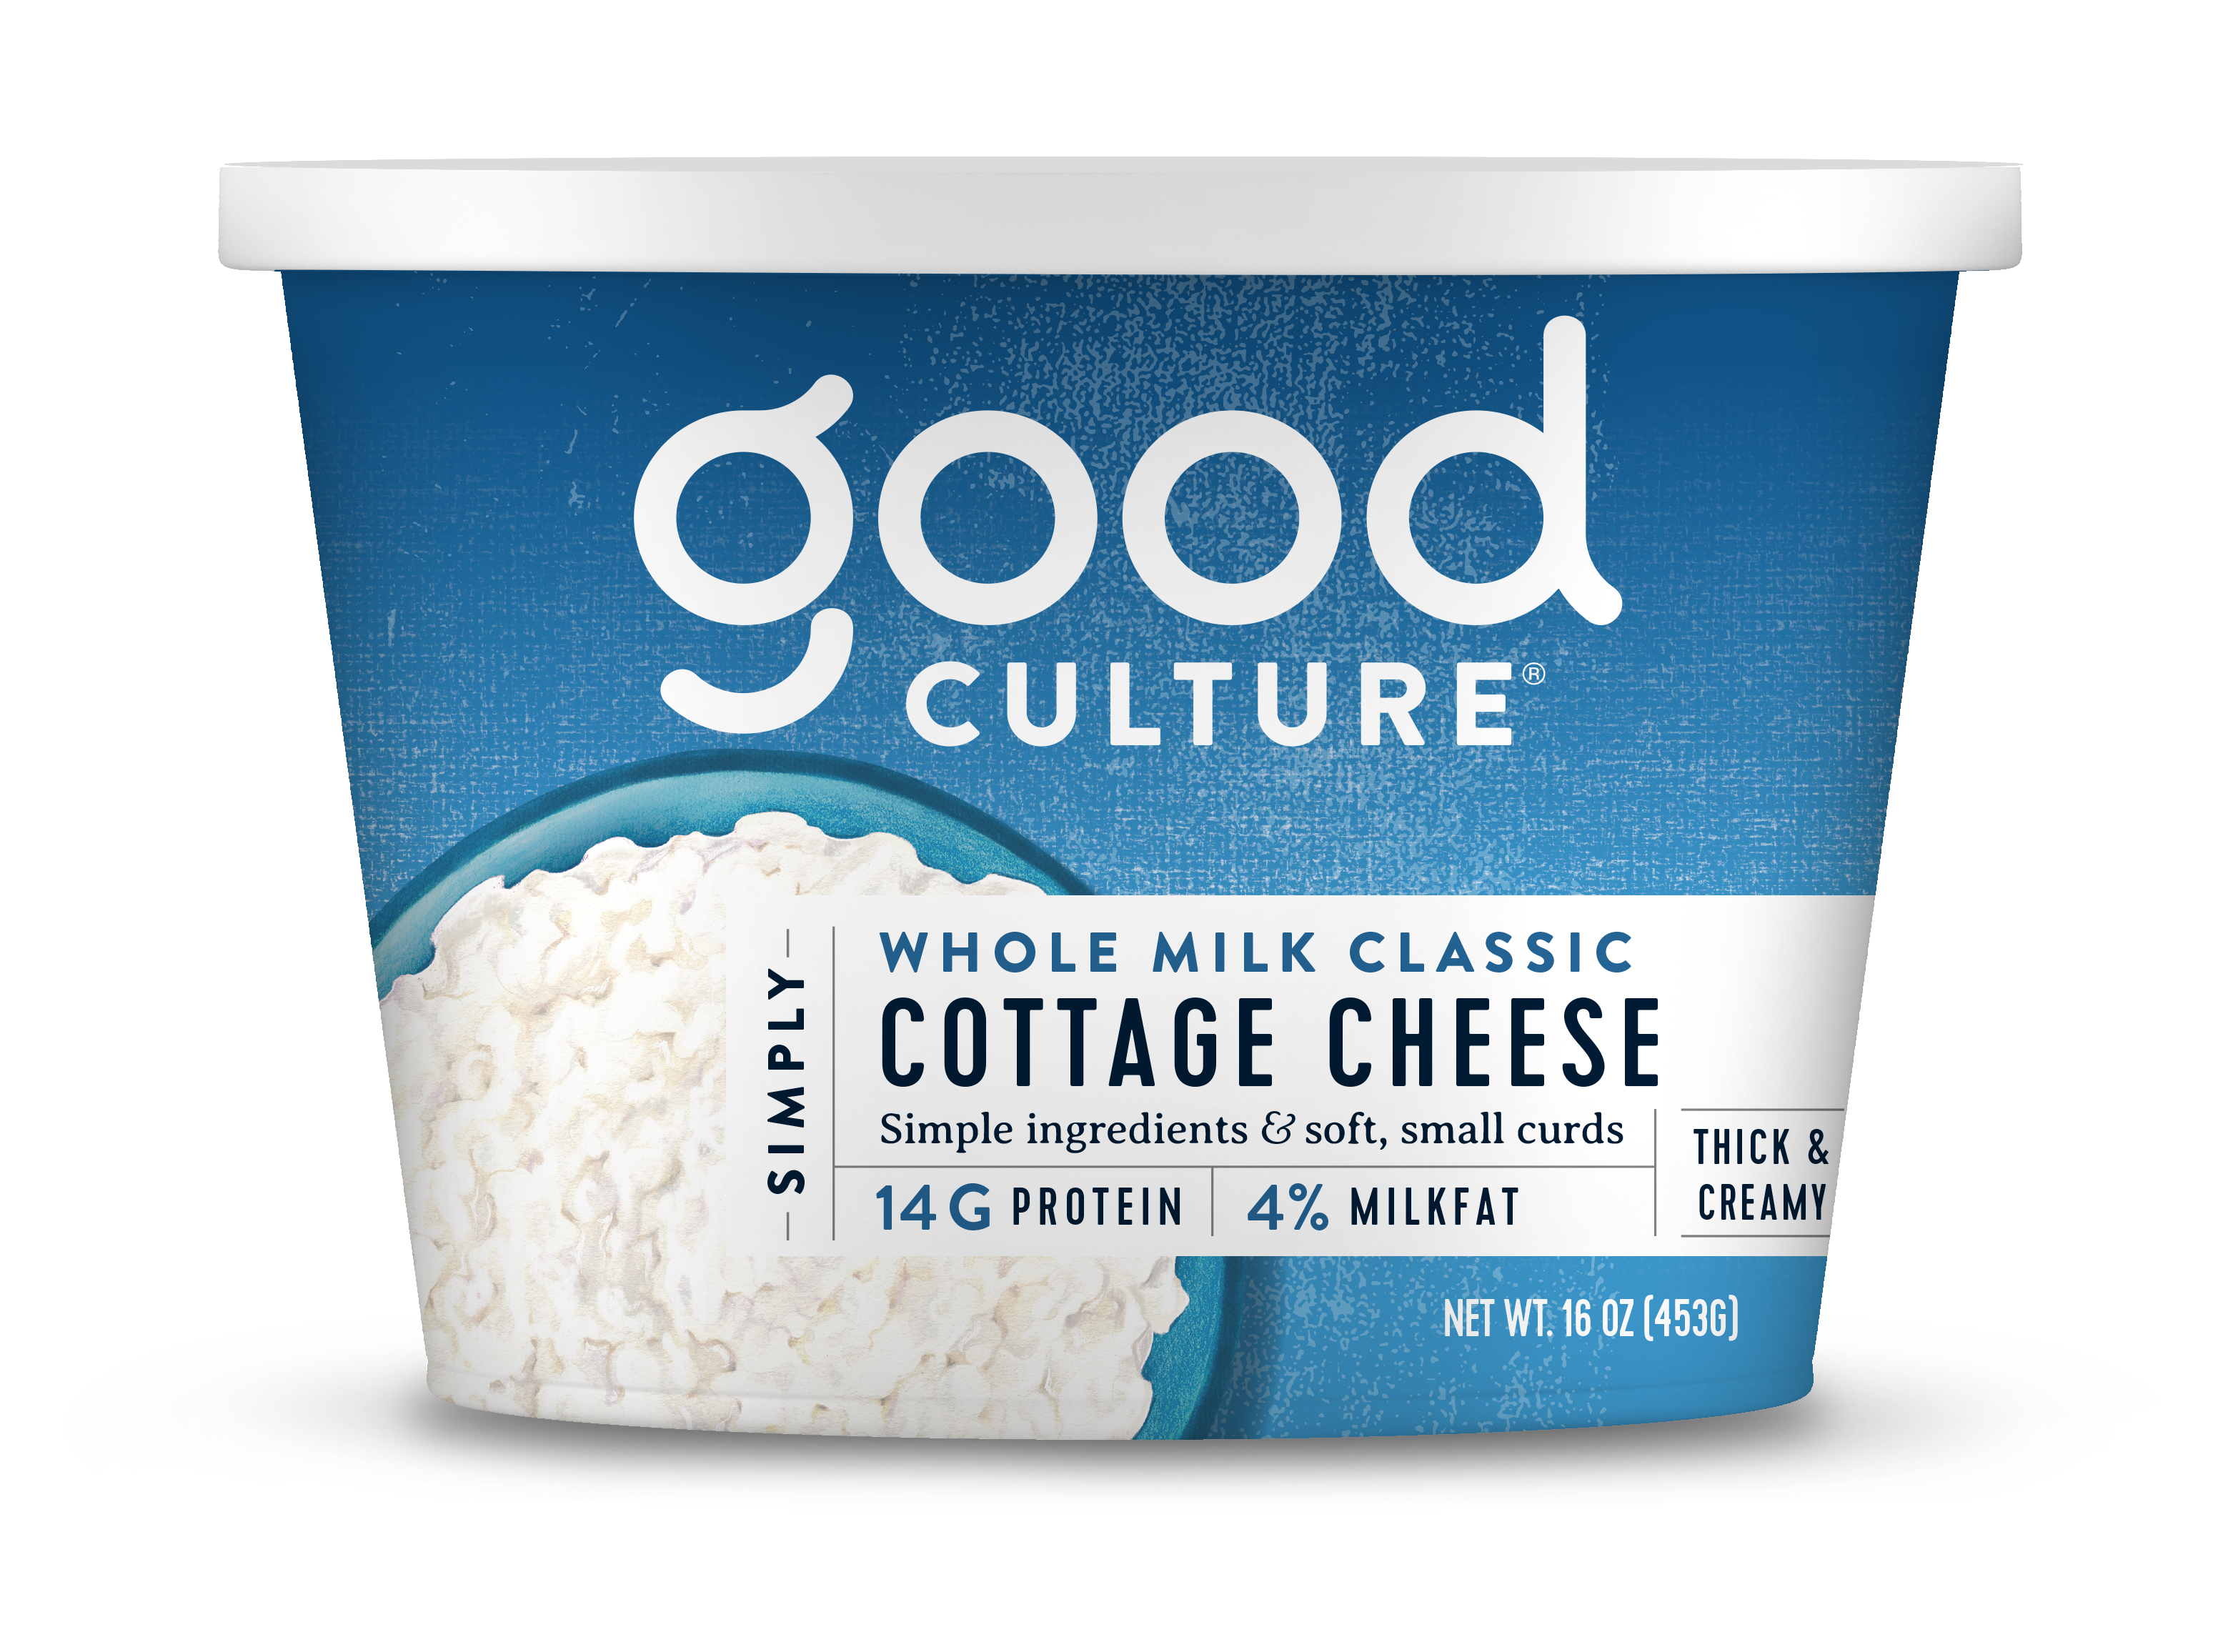 Good Culture Simply Whole Milk Classic Cottage Cheese 6 units per case 16.0 oz